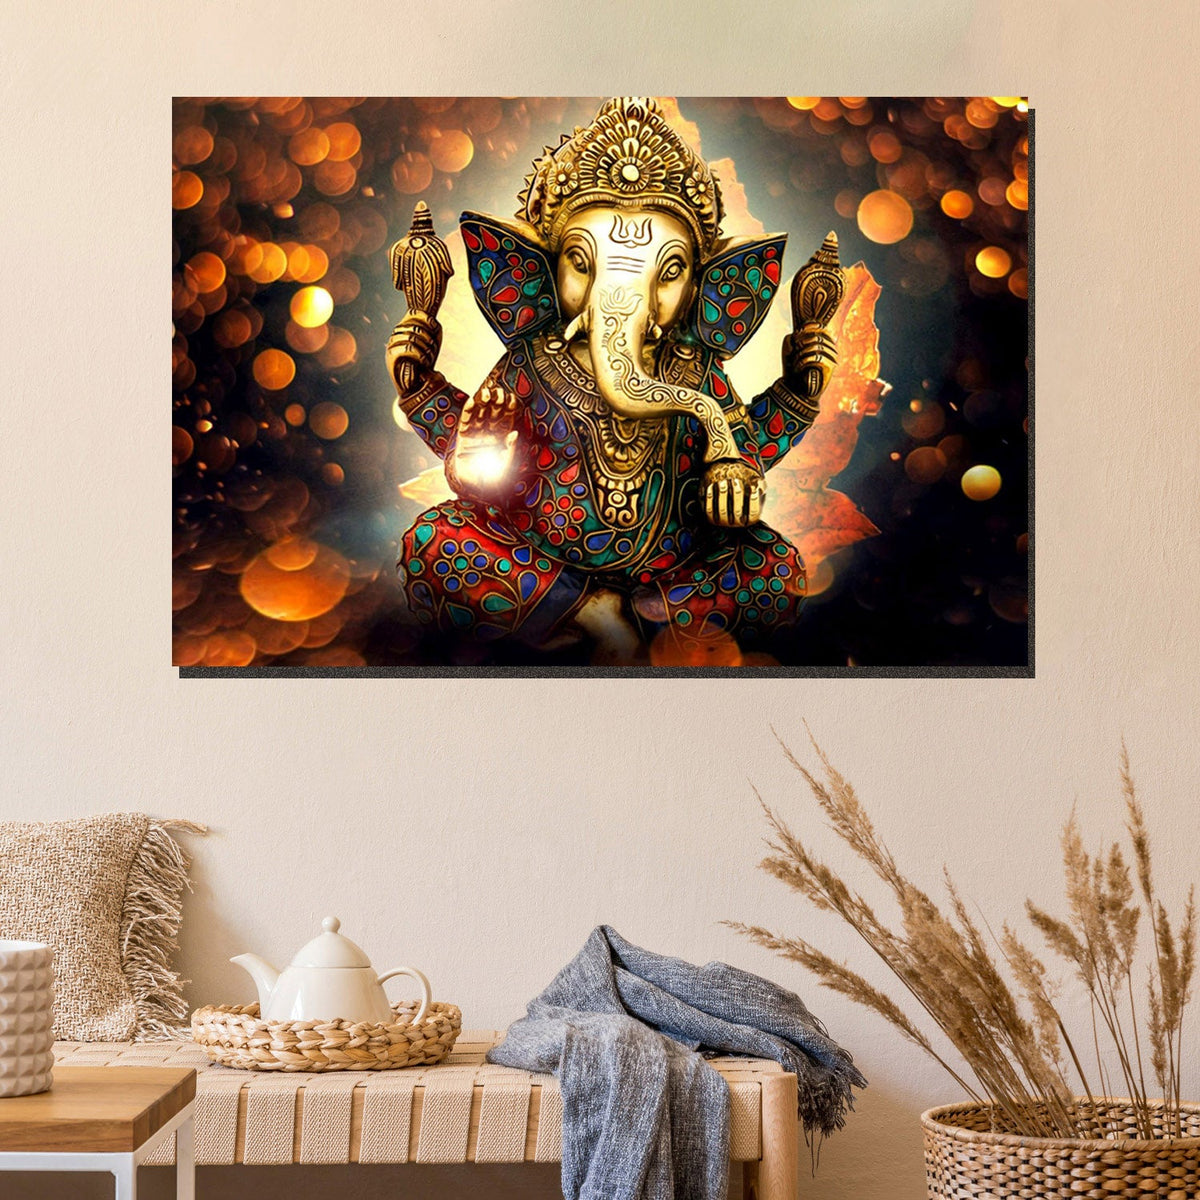 https://cdn.shopify.com/s/files/1/0387/9986/8044/products/OmGaneshaCanvasArtprintStretched-4.jpg